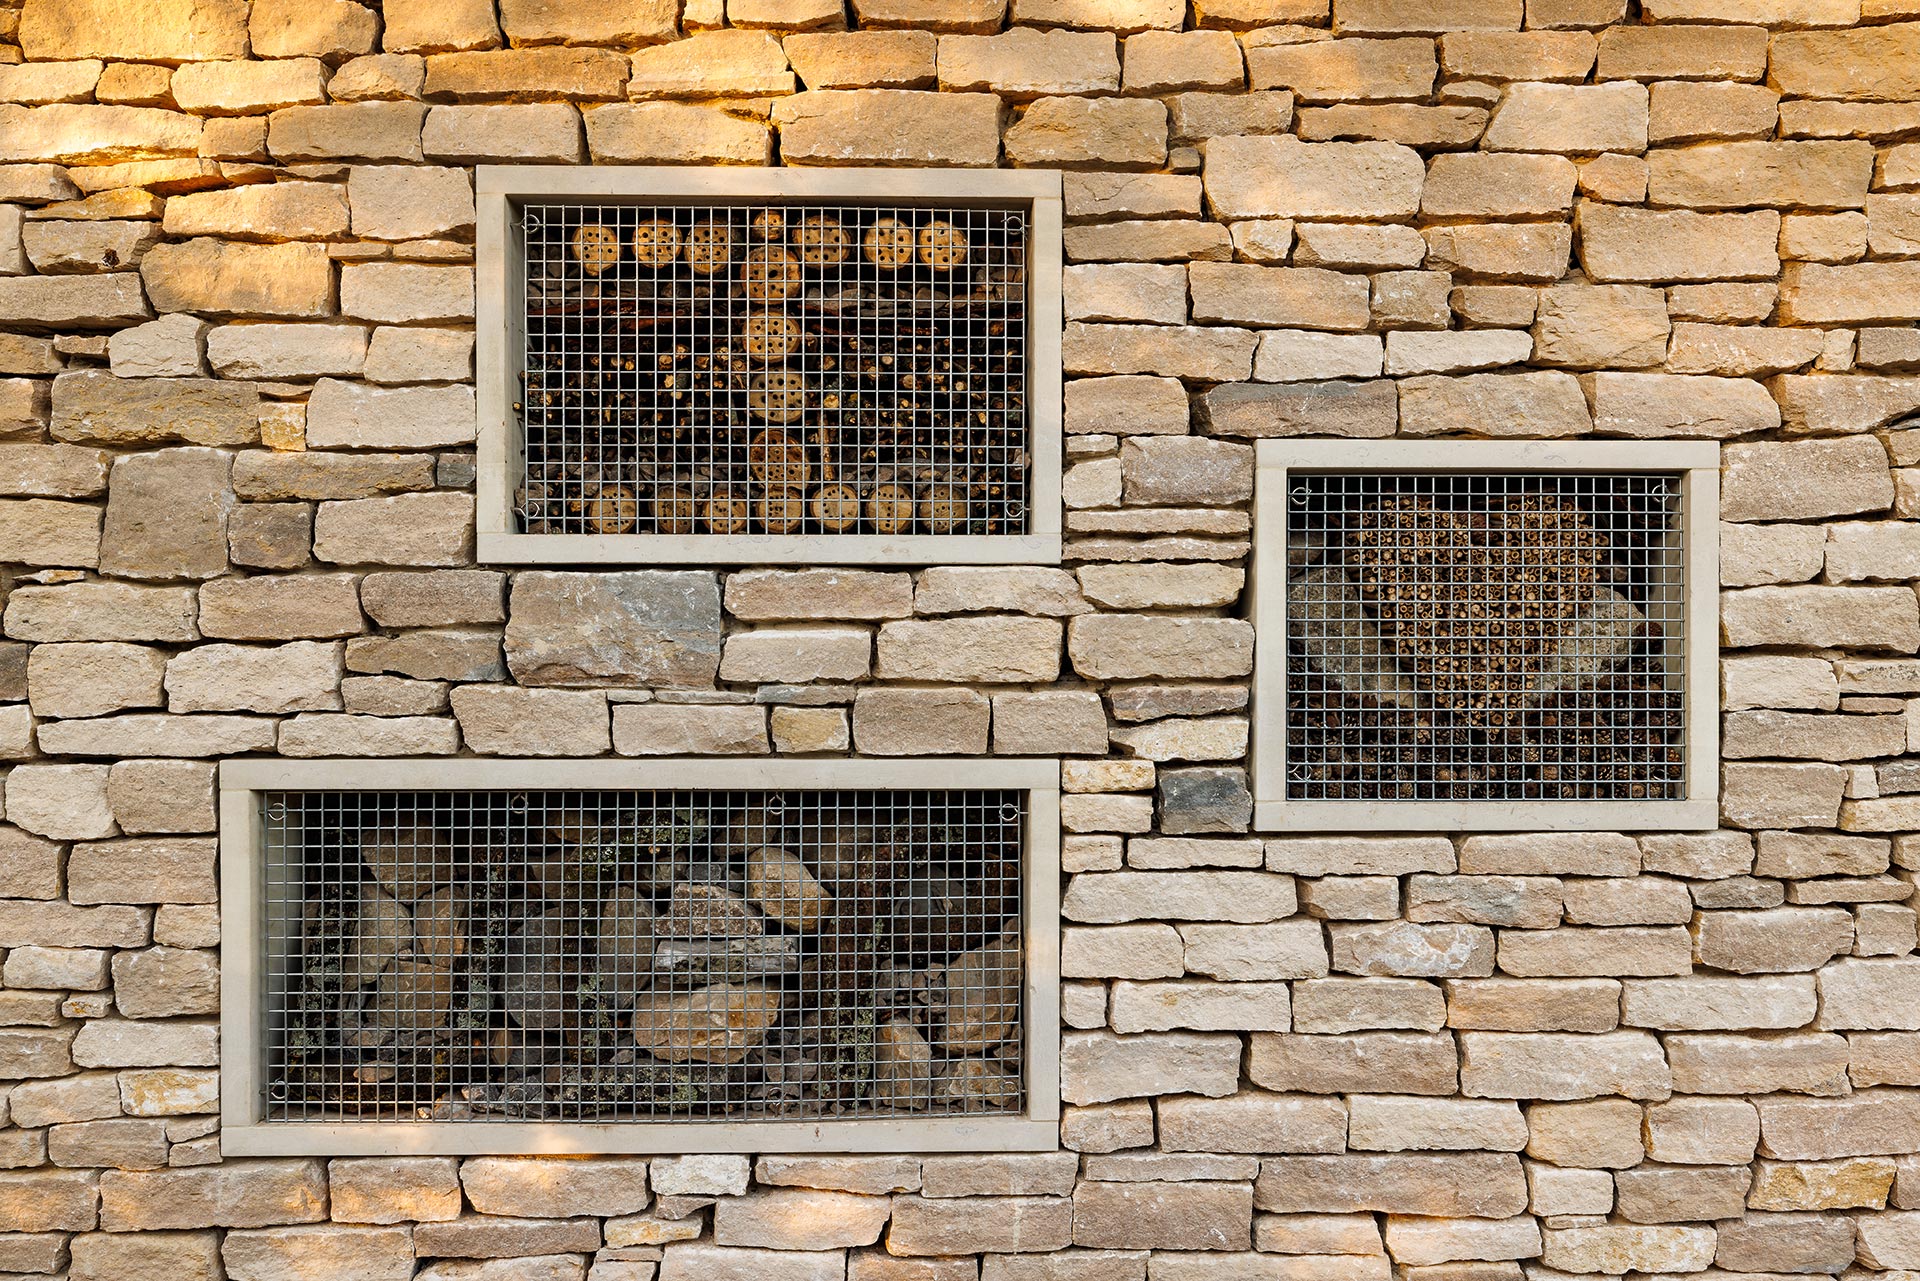 bug hotel design into the stone wall at Upton Country Park